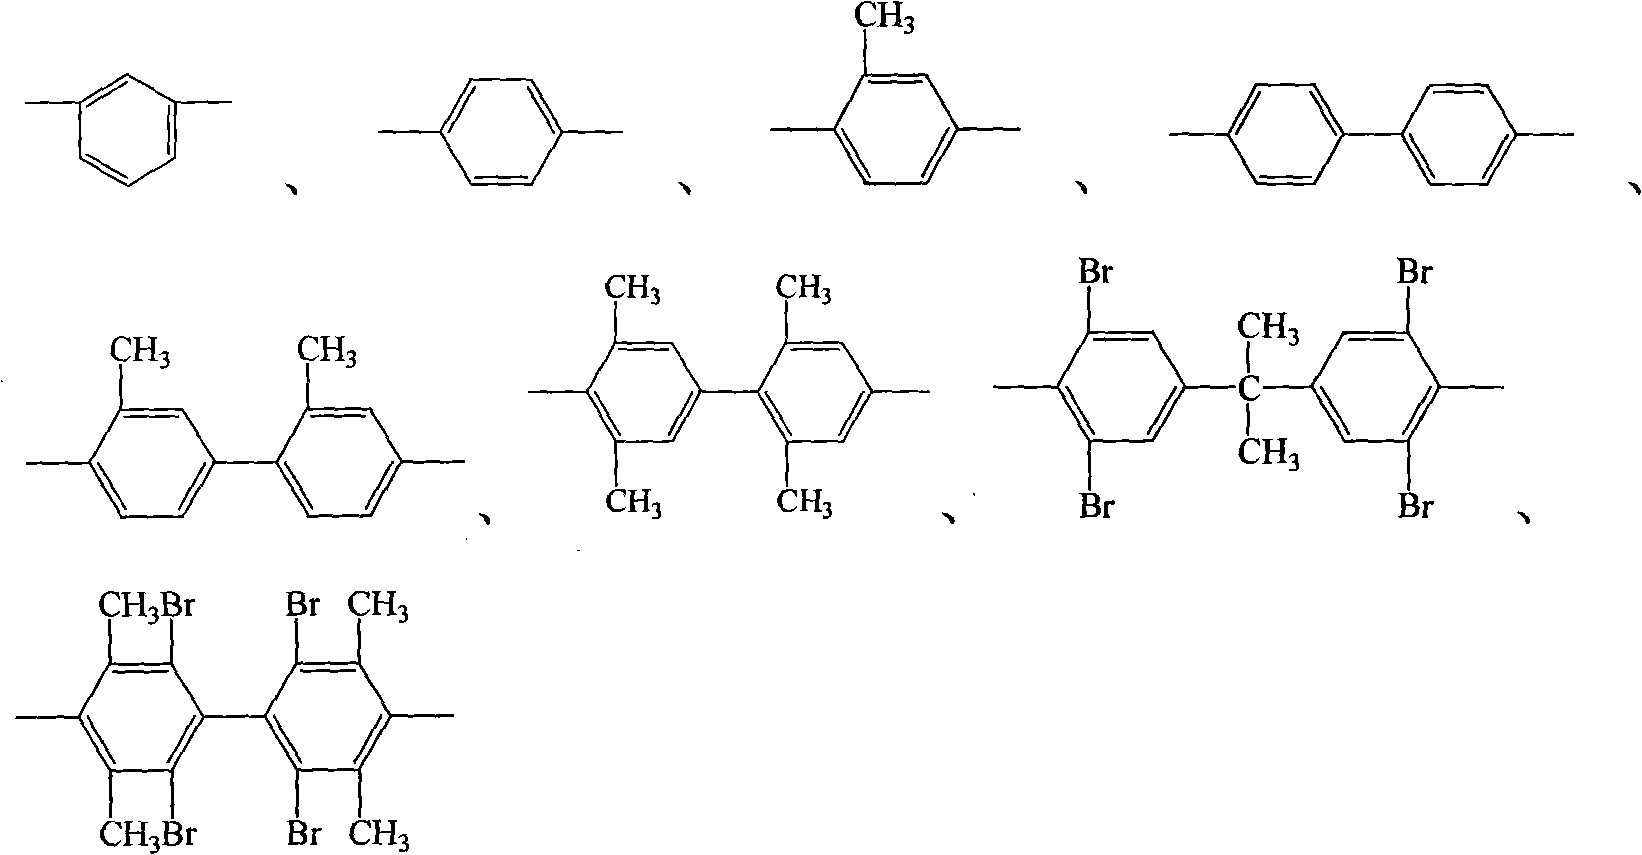 Process for producing aromatic diaether dianhydride monomer